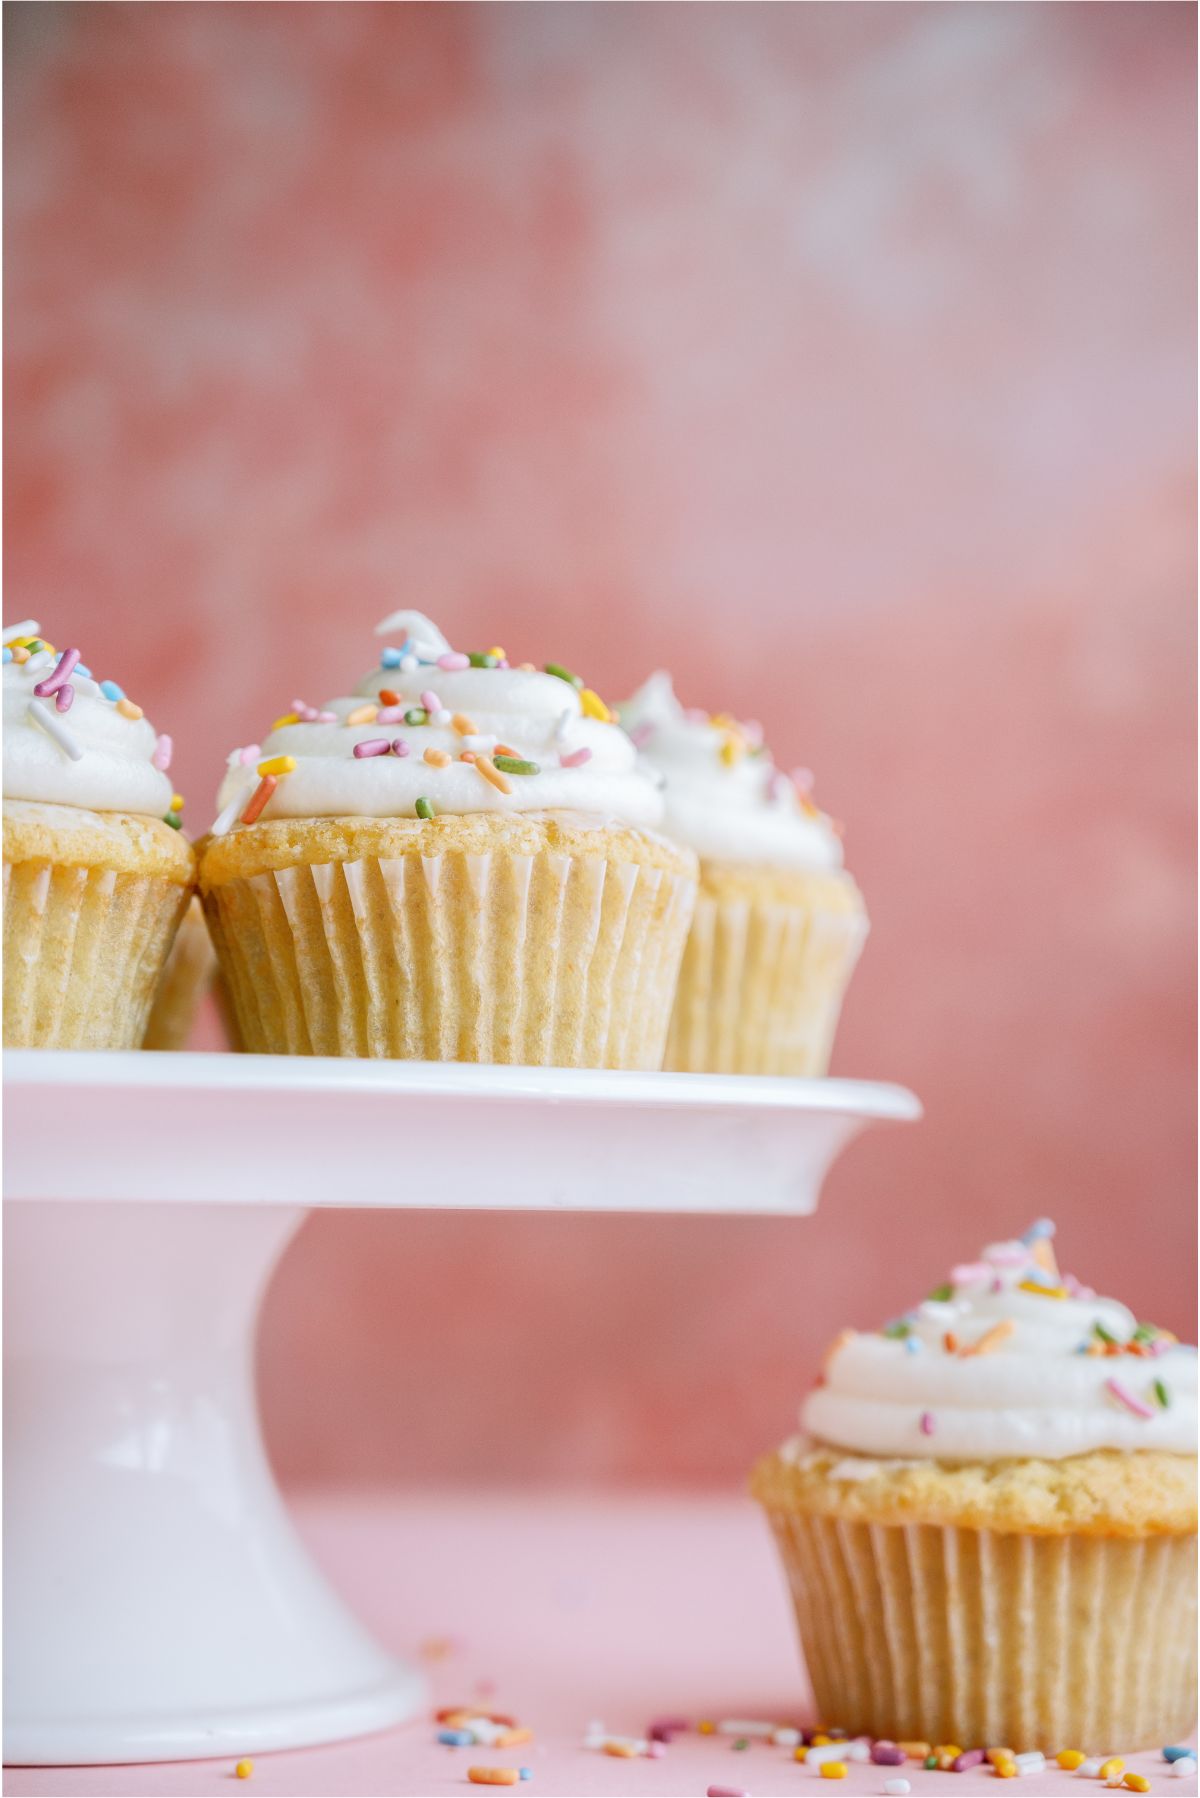 Vanilla cupcakes with frosting and sprinkles on a cake stand with one on the counter